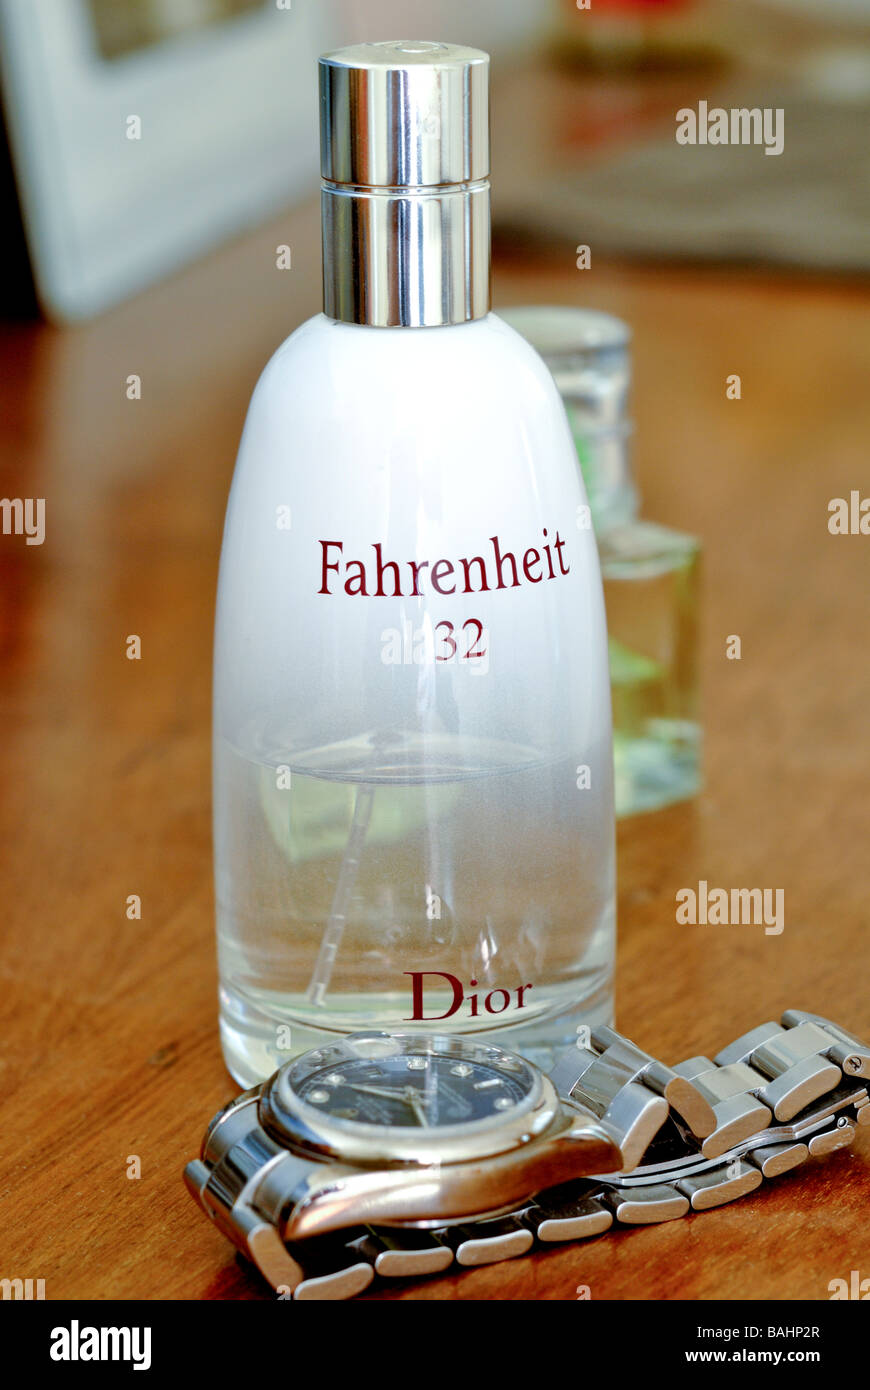 Fahrenheit 32 aftershave and watch Stock Photo - Alamy